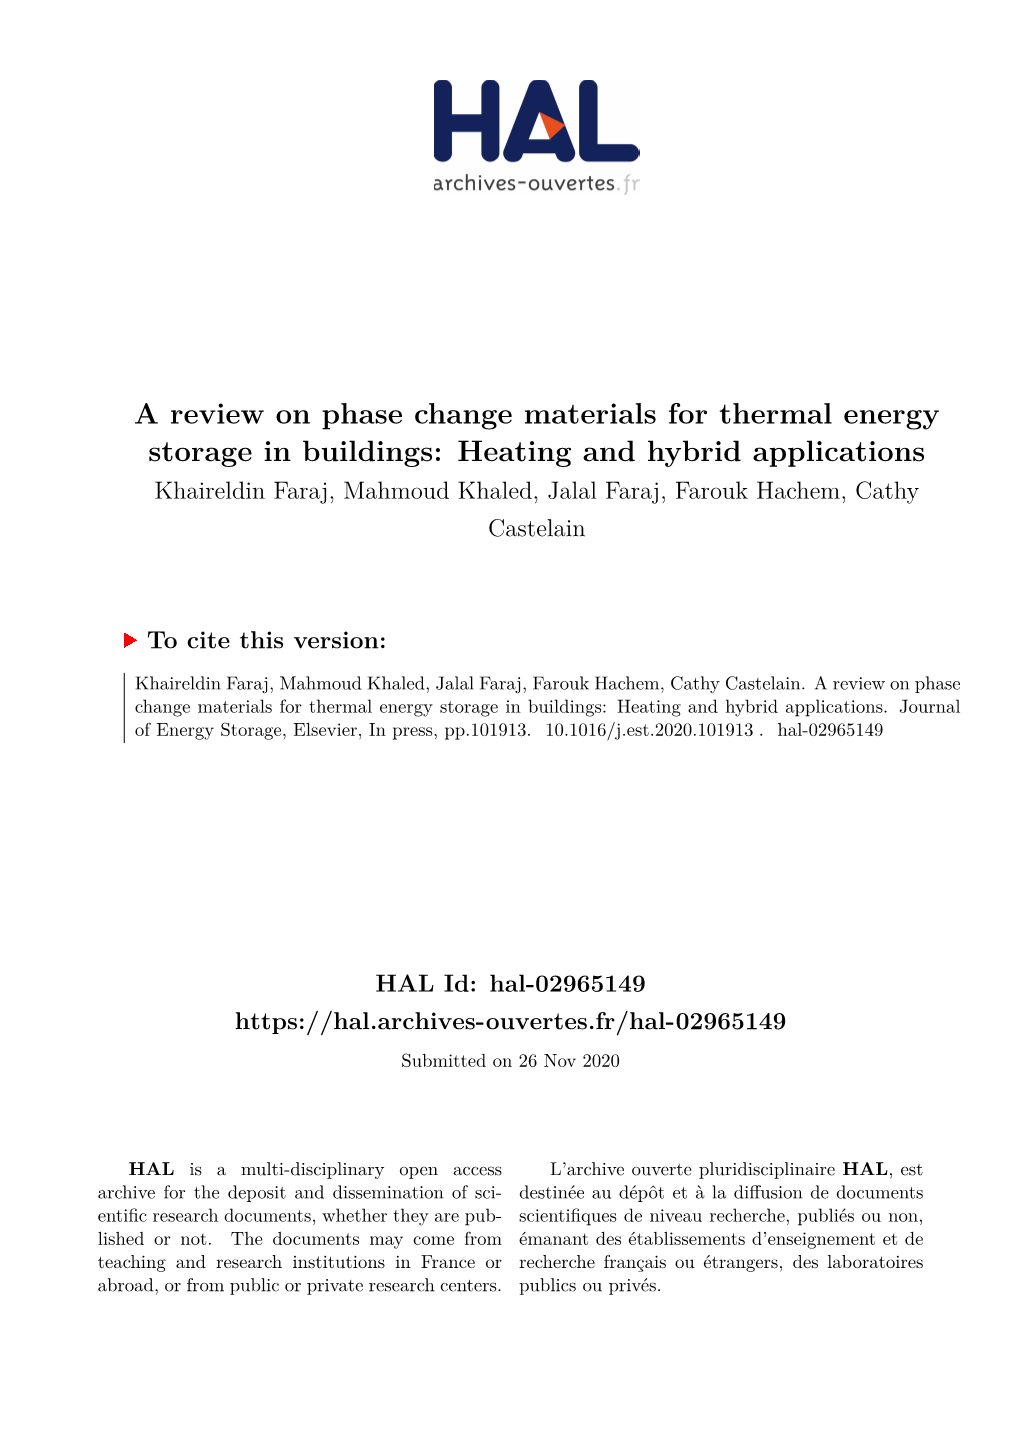 A Review on Phase Change Materials for Thermal Energy Storage in Buildings: Heating and Hybrid Applications